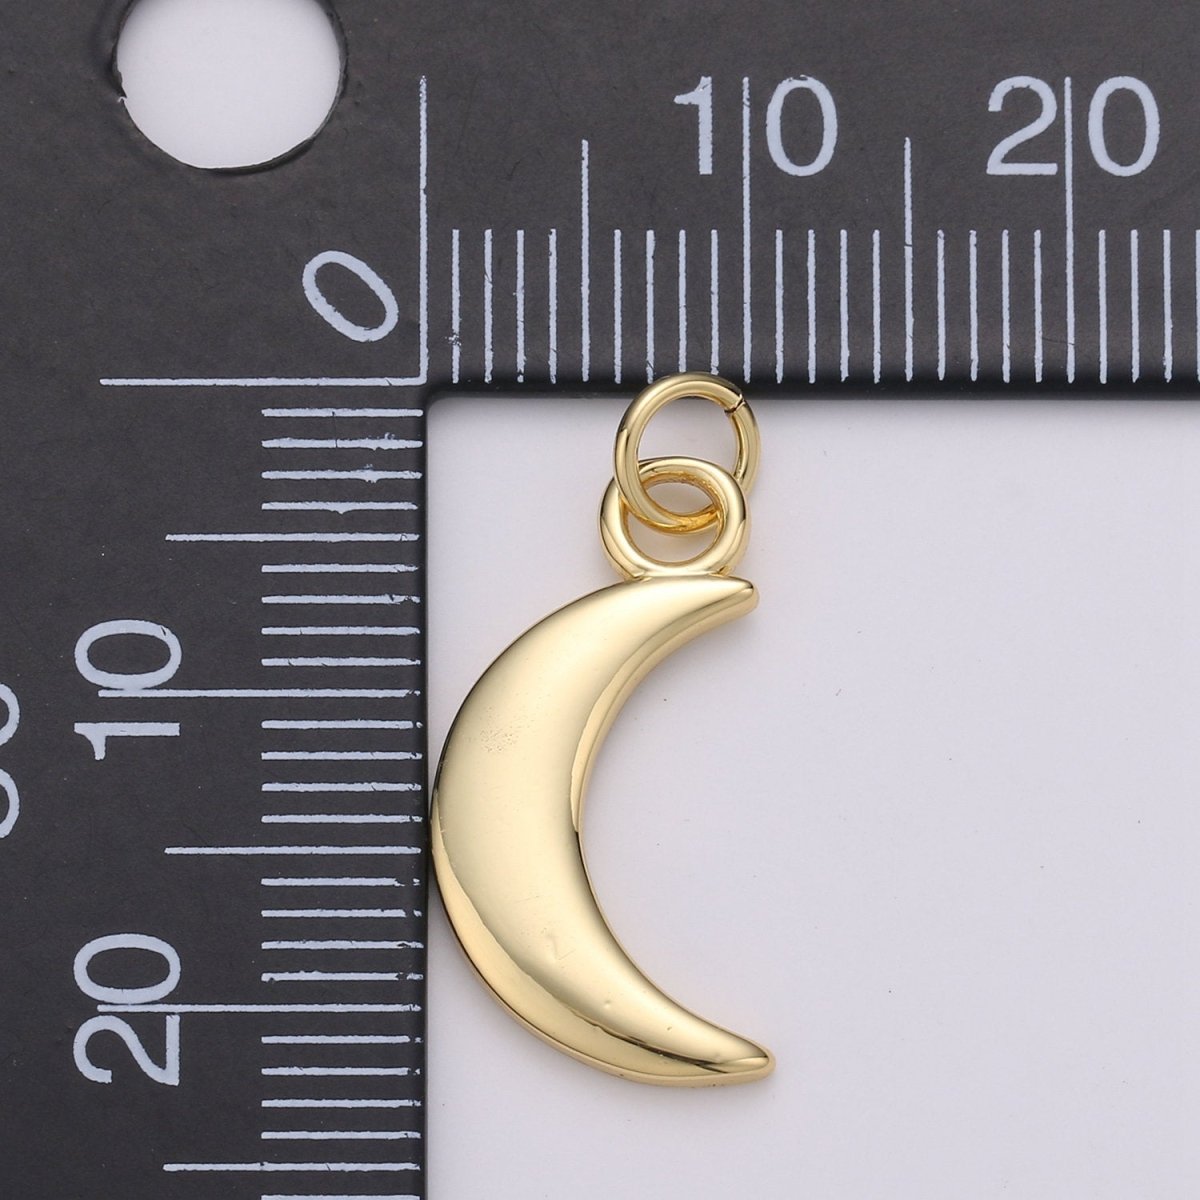 Small Crescent Charm - Gold Moon Charm Celestial Jewelry making for Necklace Bracelet Earring Charm in 14k gold plated D-350 - DLUXCA